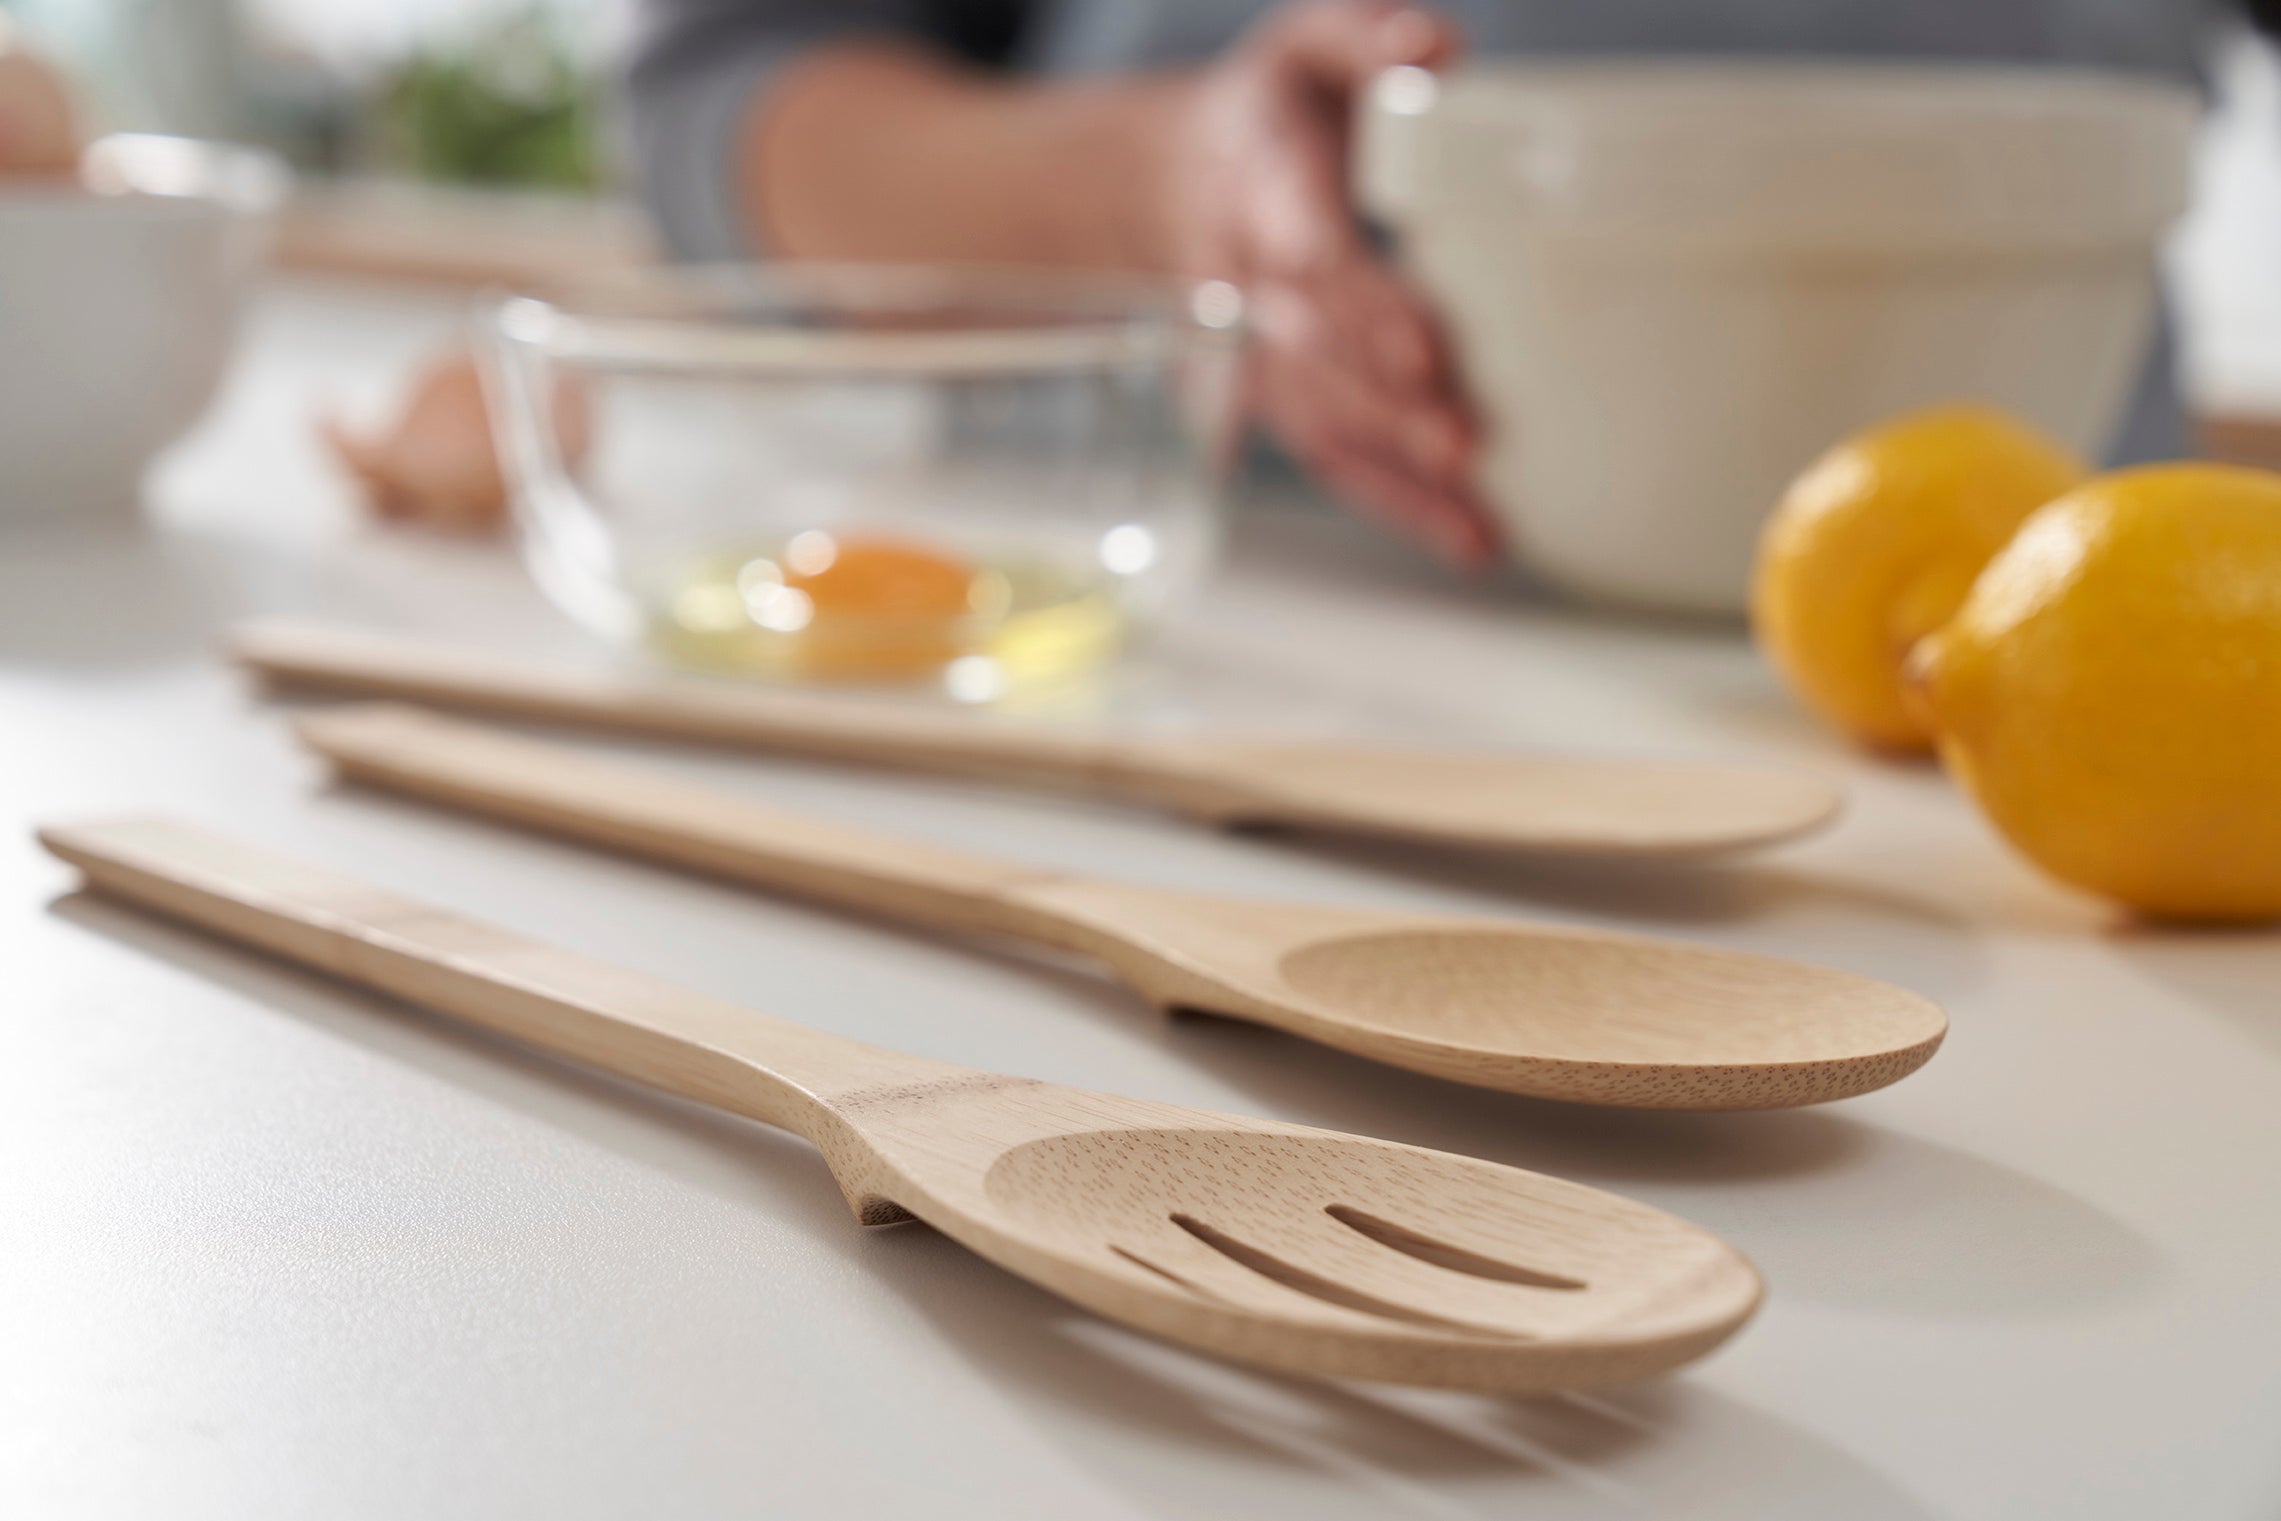 bambu® creates eco-friendly dinnerware & sustainable home goods. Specializing in certified organic products, disposable plates, kitchen utensils, cutlery, cutting boards made from renewable resources such as bamboo, cork, and more. Shop now.